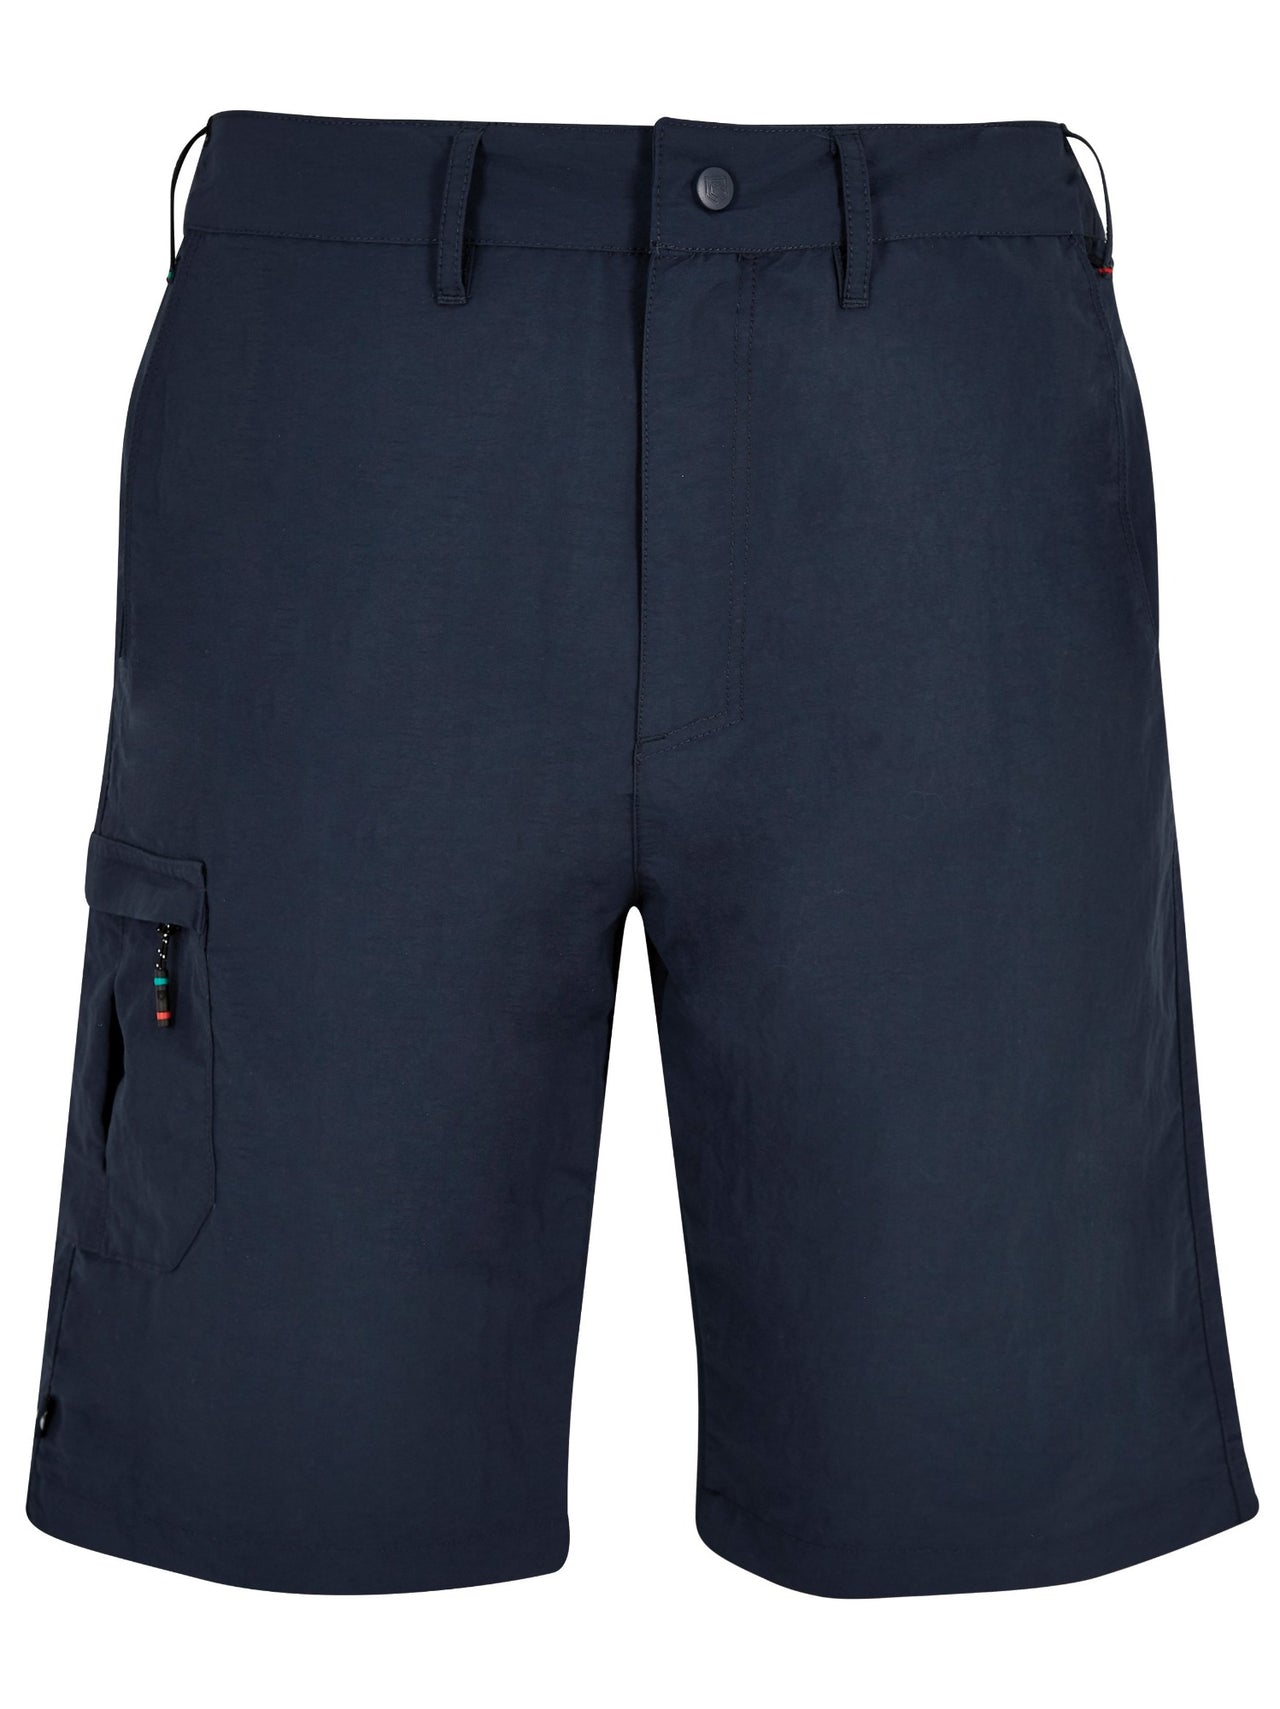 DUBARRY Mens Cyprus Fast Dry Crew Shorts NAVY (Online only*)